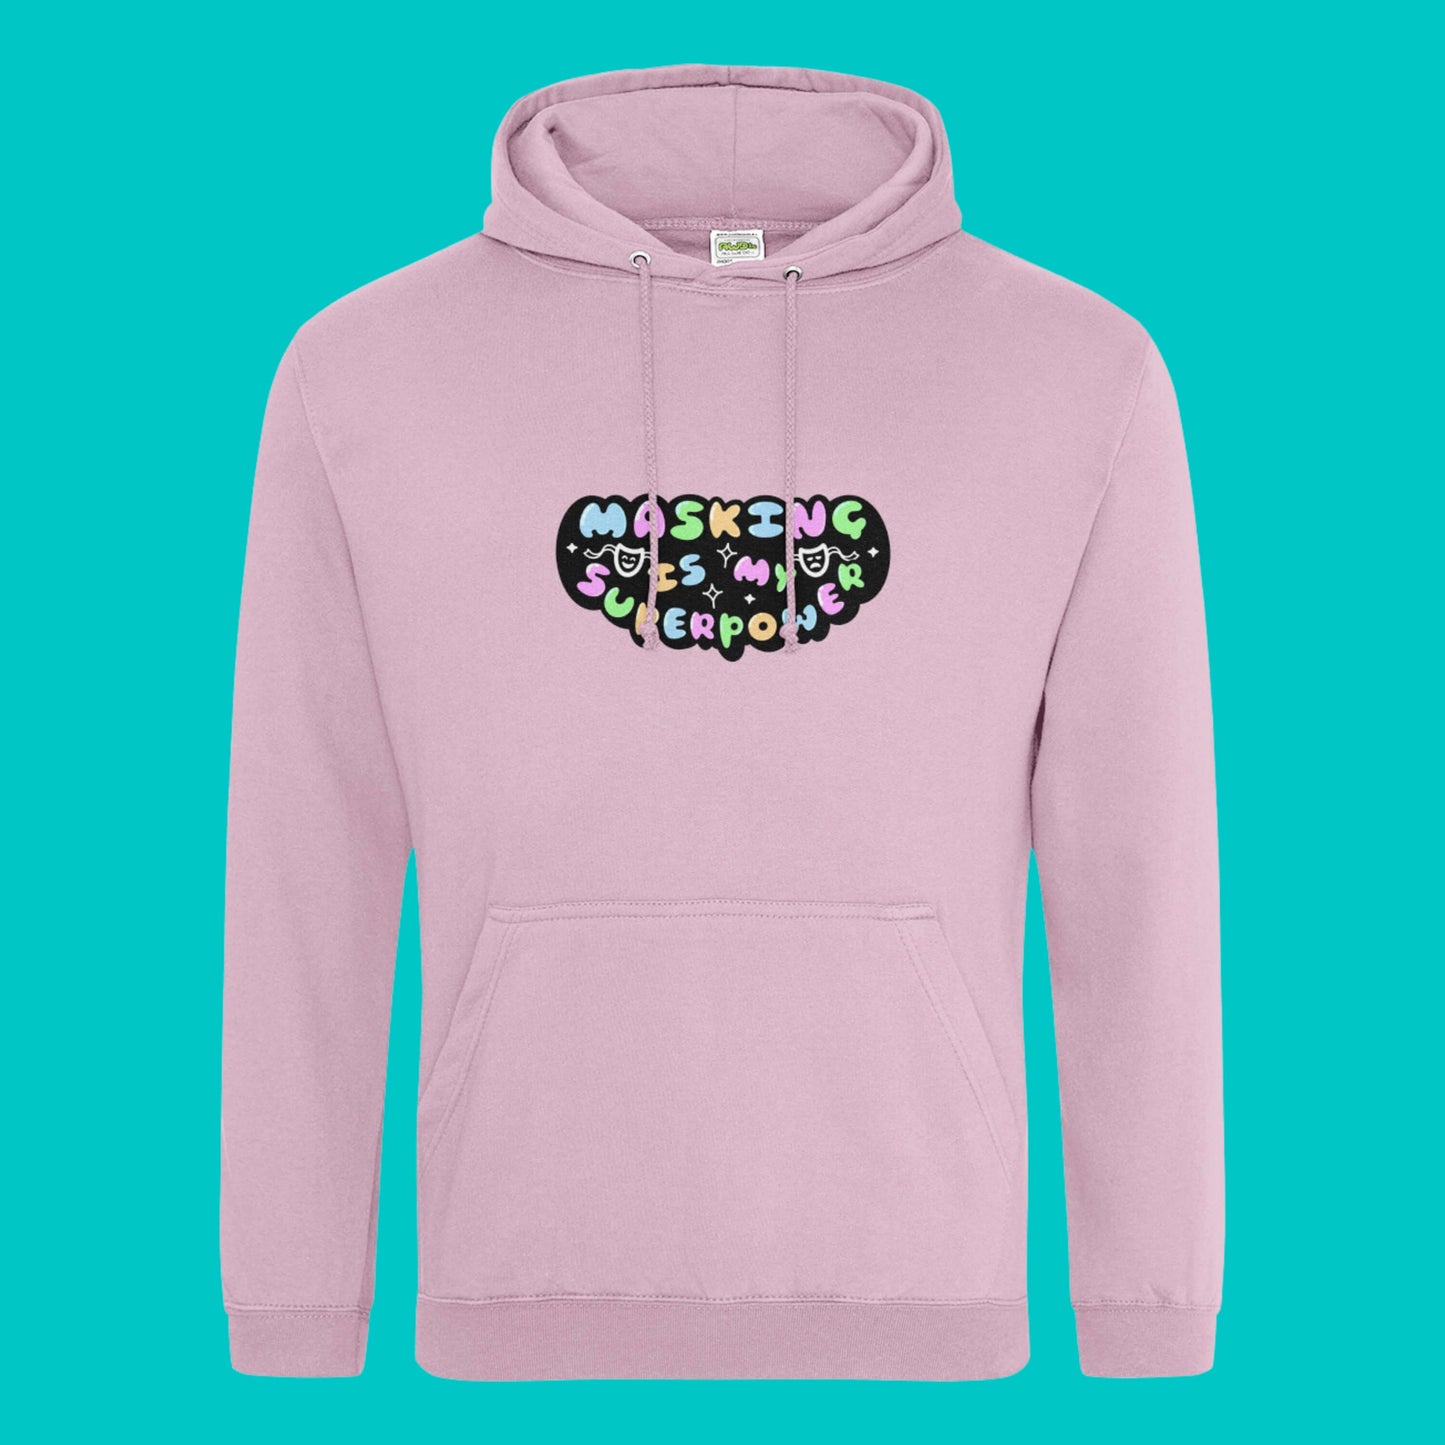 The baby pink Masking Is My Super Power Hoodie on a blue background. The pastel pink hoodie features pastel rainbow bubble writing that reads 'masking is my superpower' with white sparkles, a happy and sad drama masks all on a black oval. Raising awareness for neurodivergent people with ADHD or Autism.